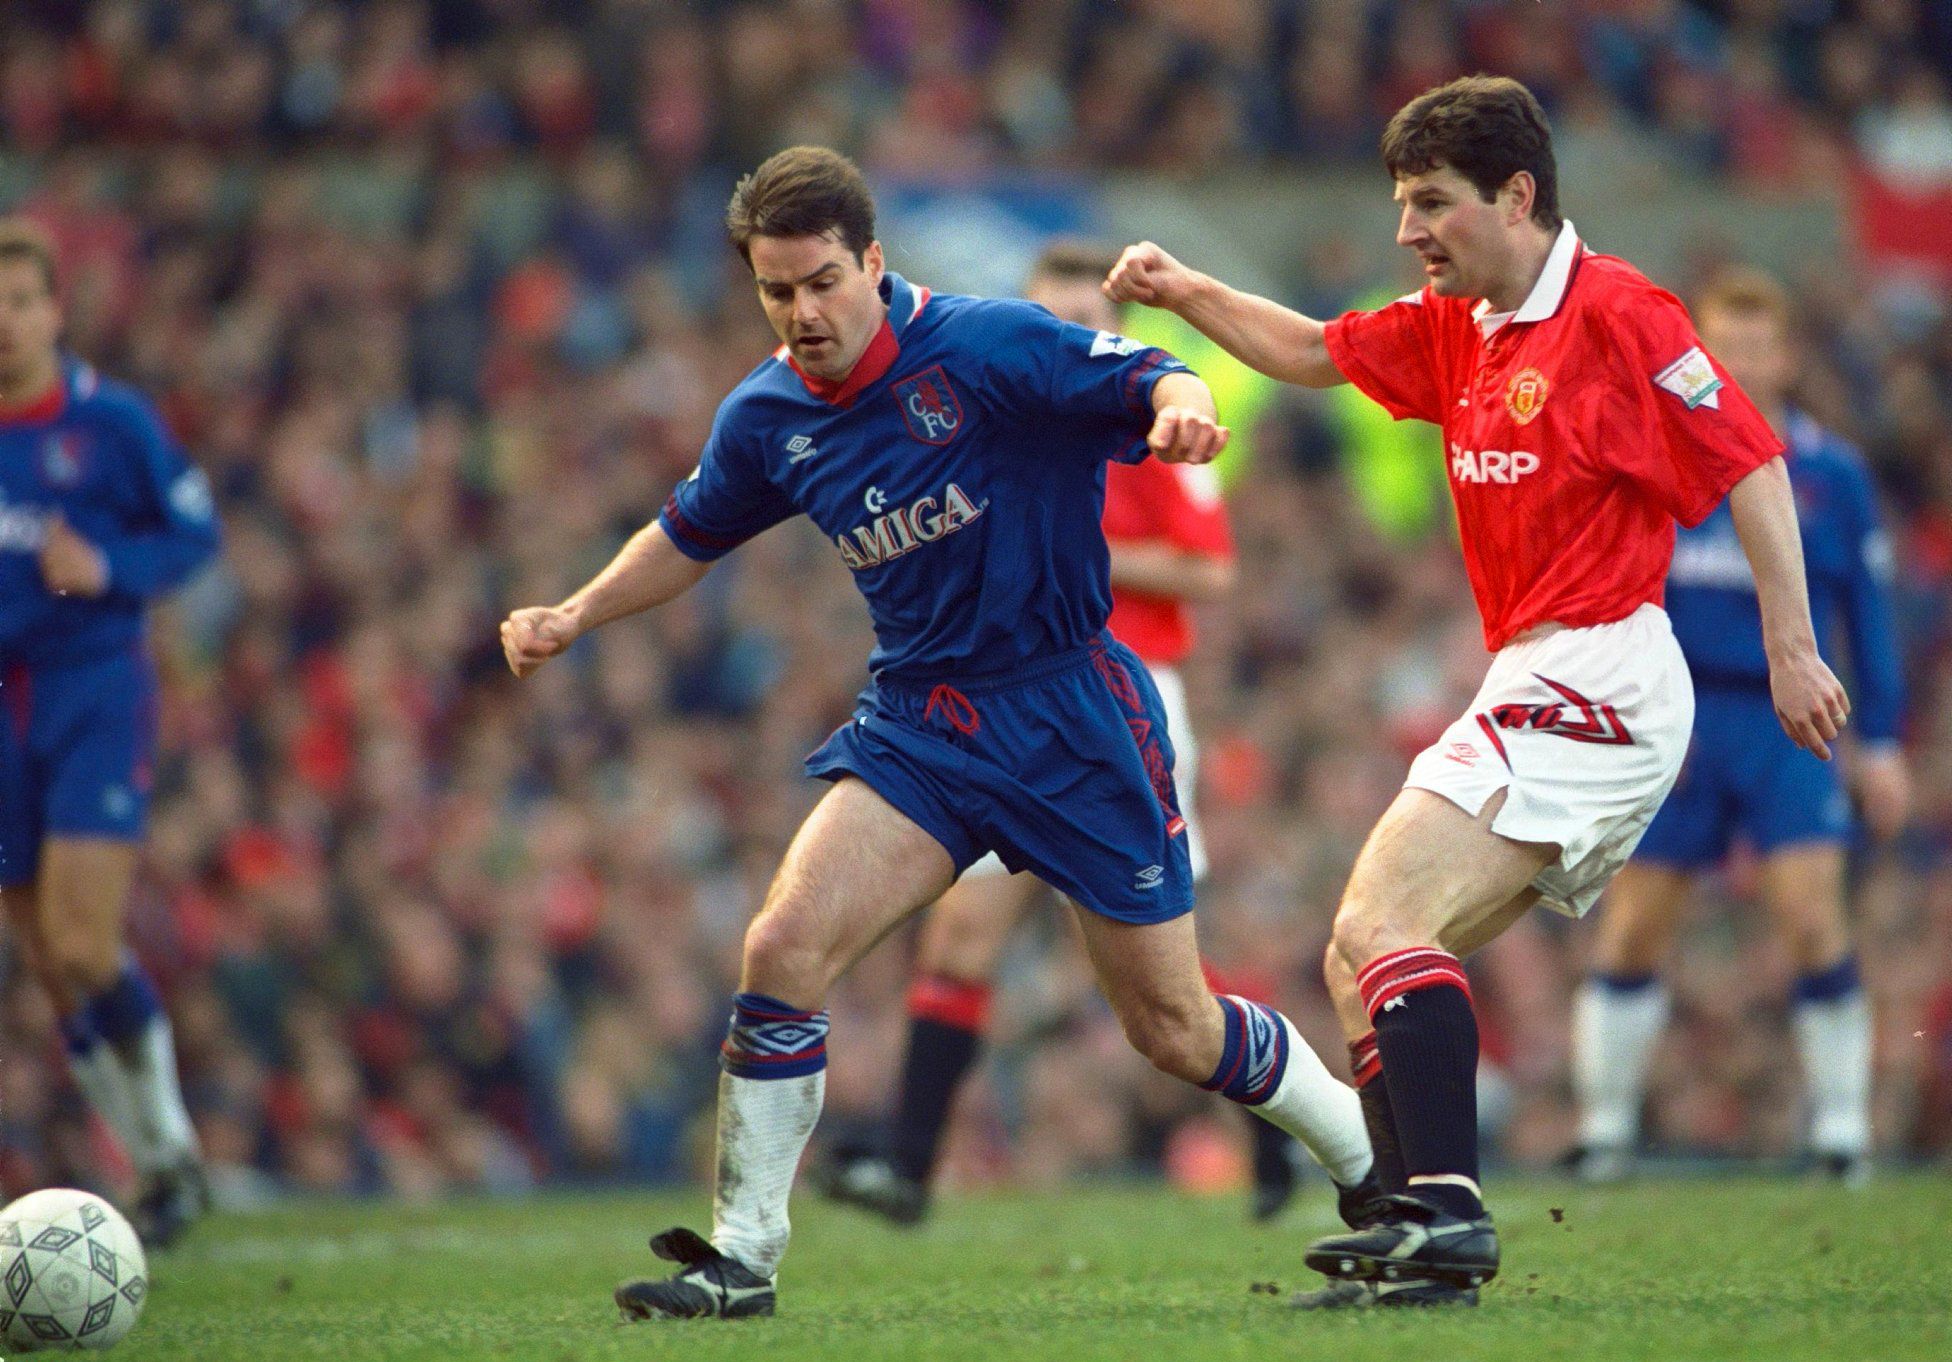 Manchester United v Chelsea 5/3/94 F.A.Premiership<br /> Pic : Action Images / John Sibley<br /> Chelsea's Steve Clarke takes on Manchester United's Denis Irwin